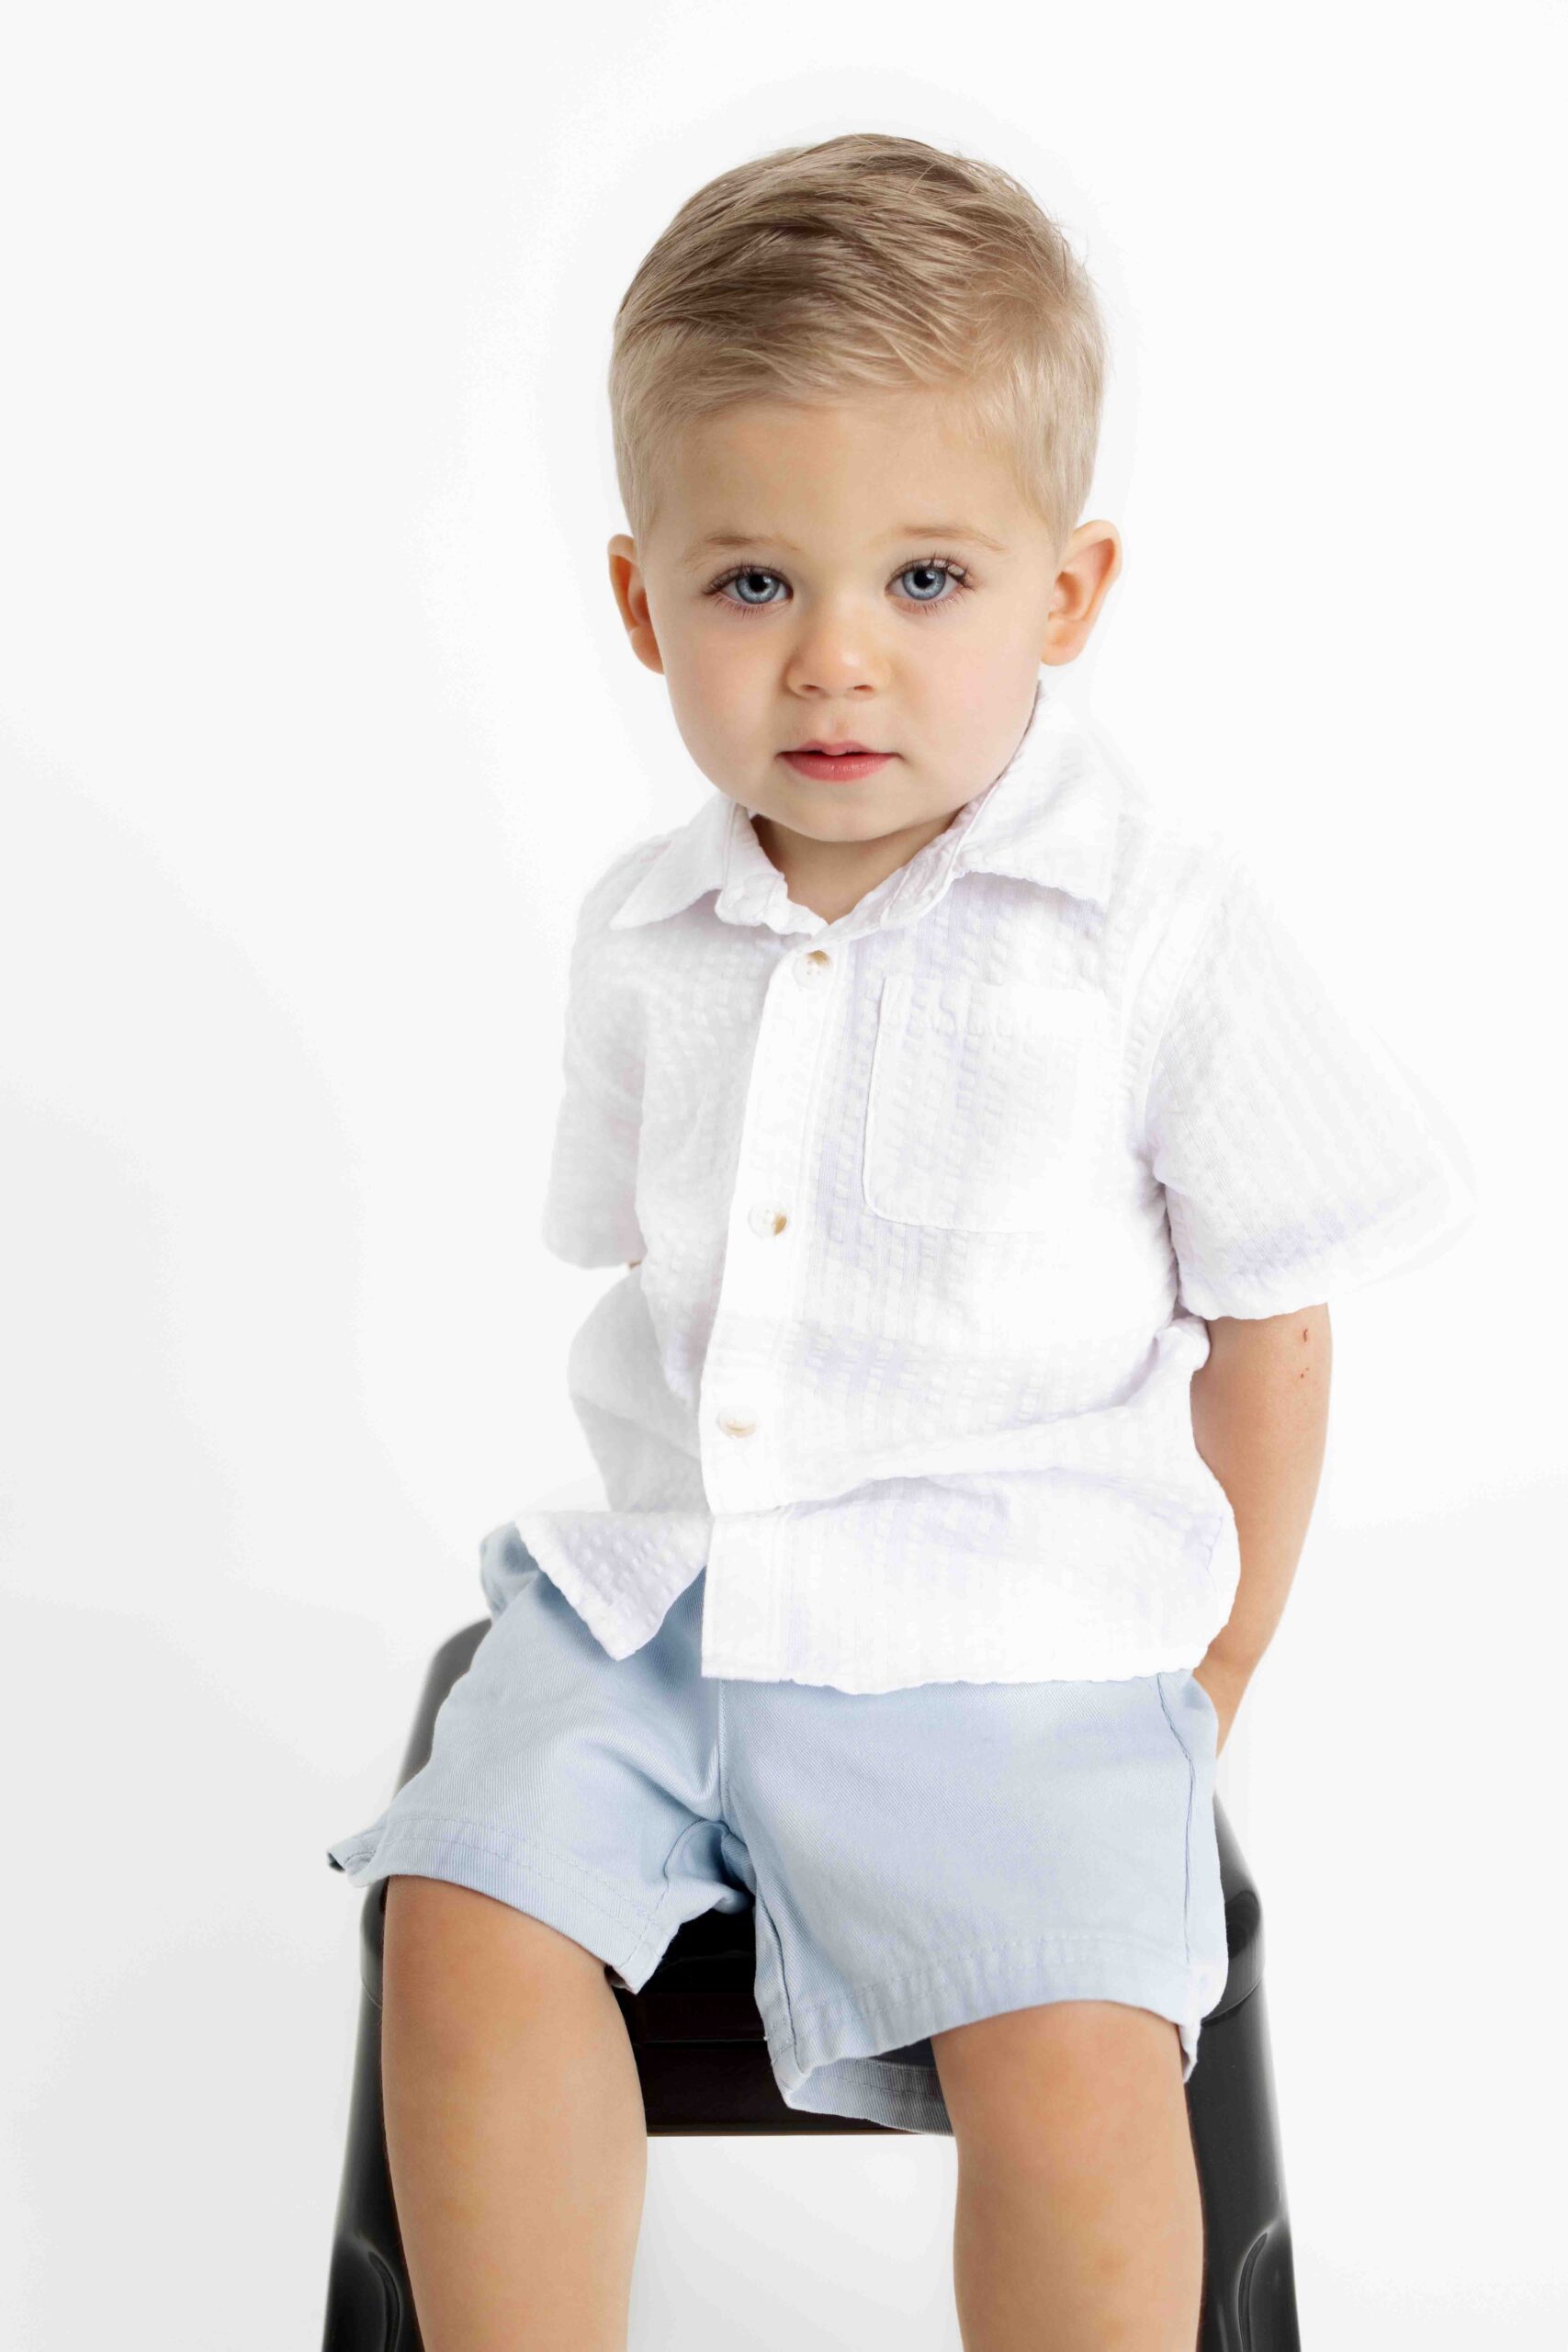 little boy sitting on a stool looking at the camera